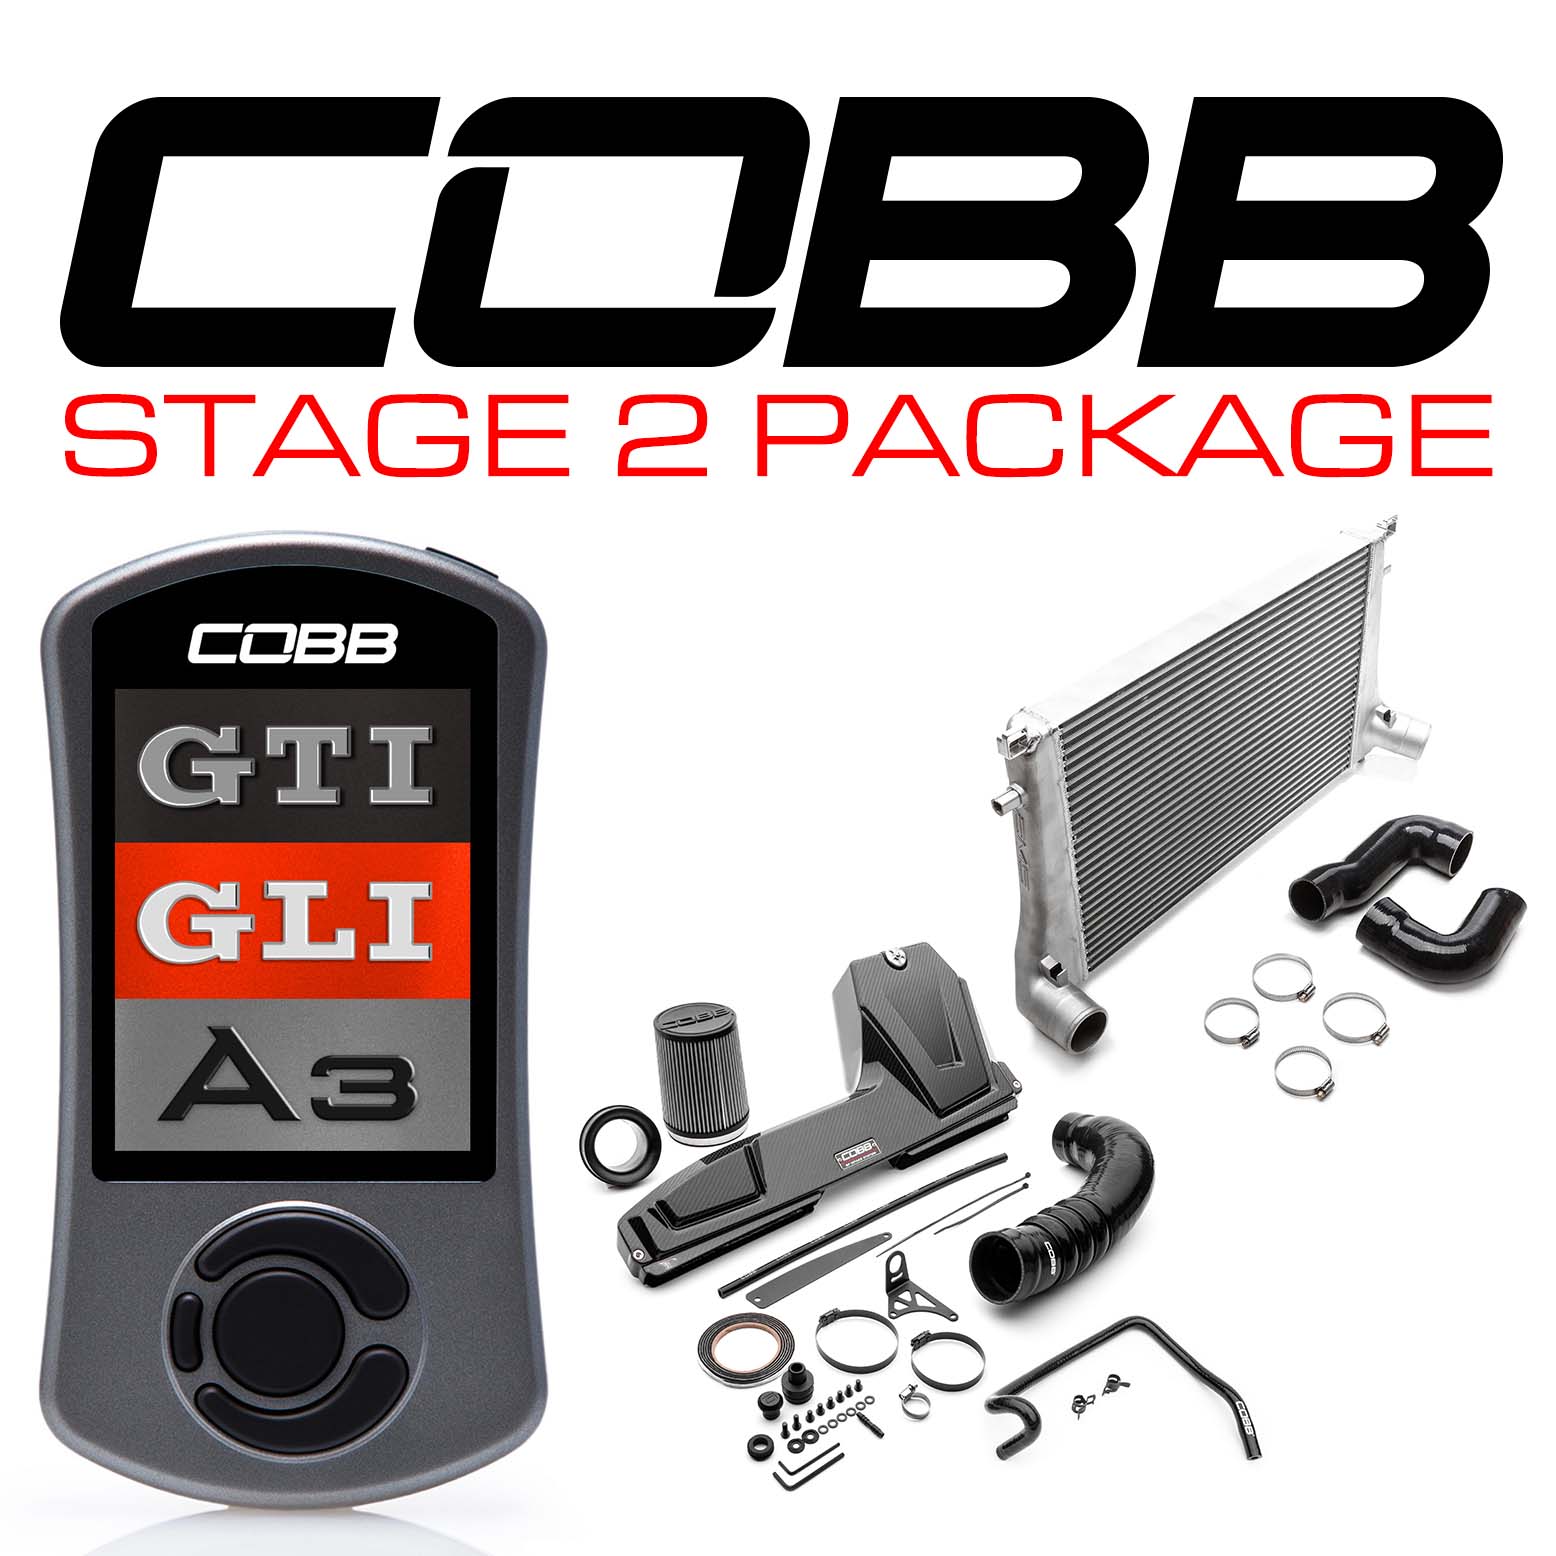 Stage 2 Redline Carbon Fiber Power Package with DSG / S Tronic Flashing for GTI (Mk7/Mk7.5) GTI, Jetta (A7) GLI, Audi A3 (8V)